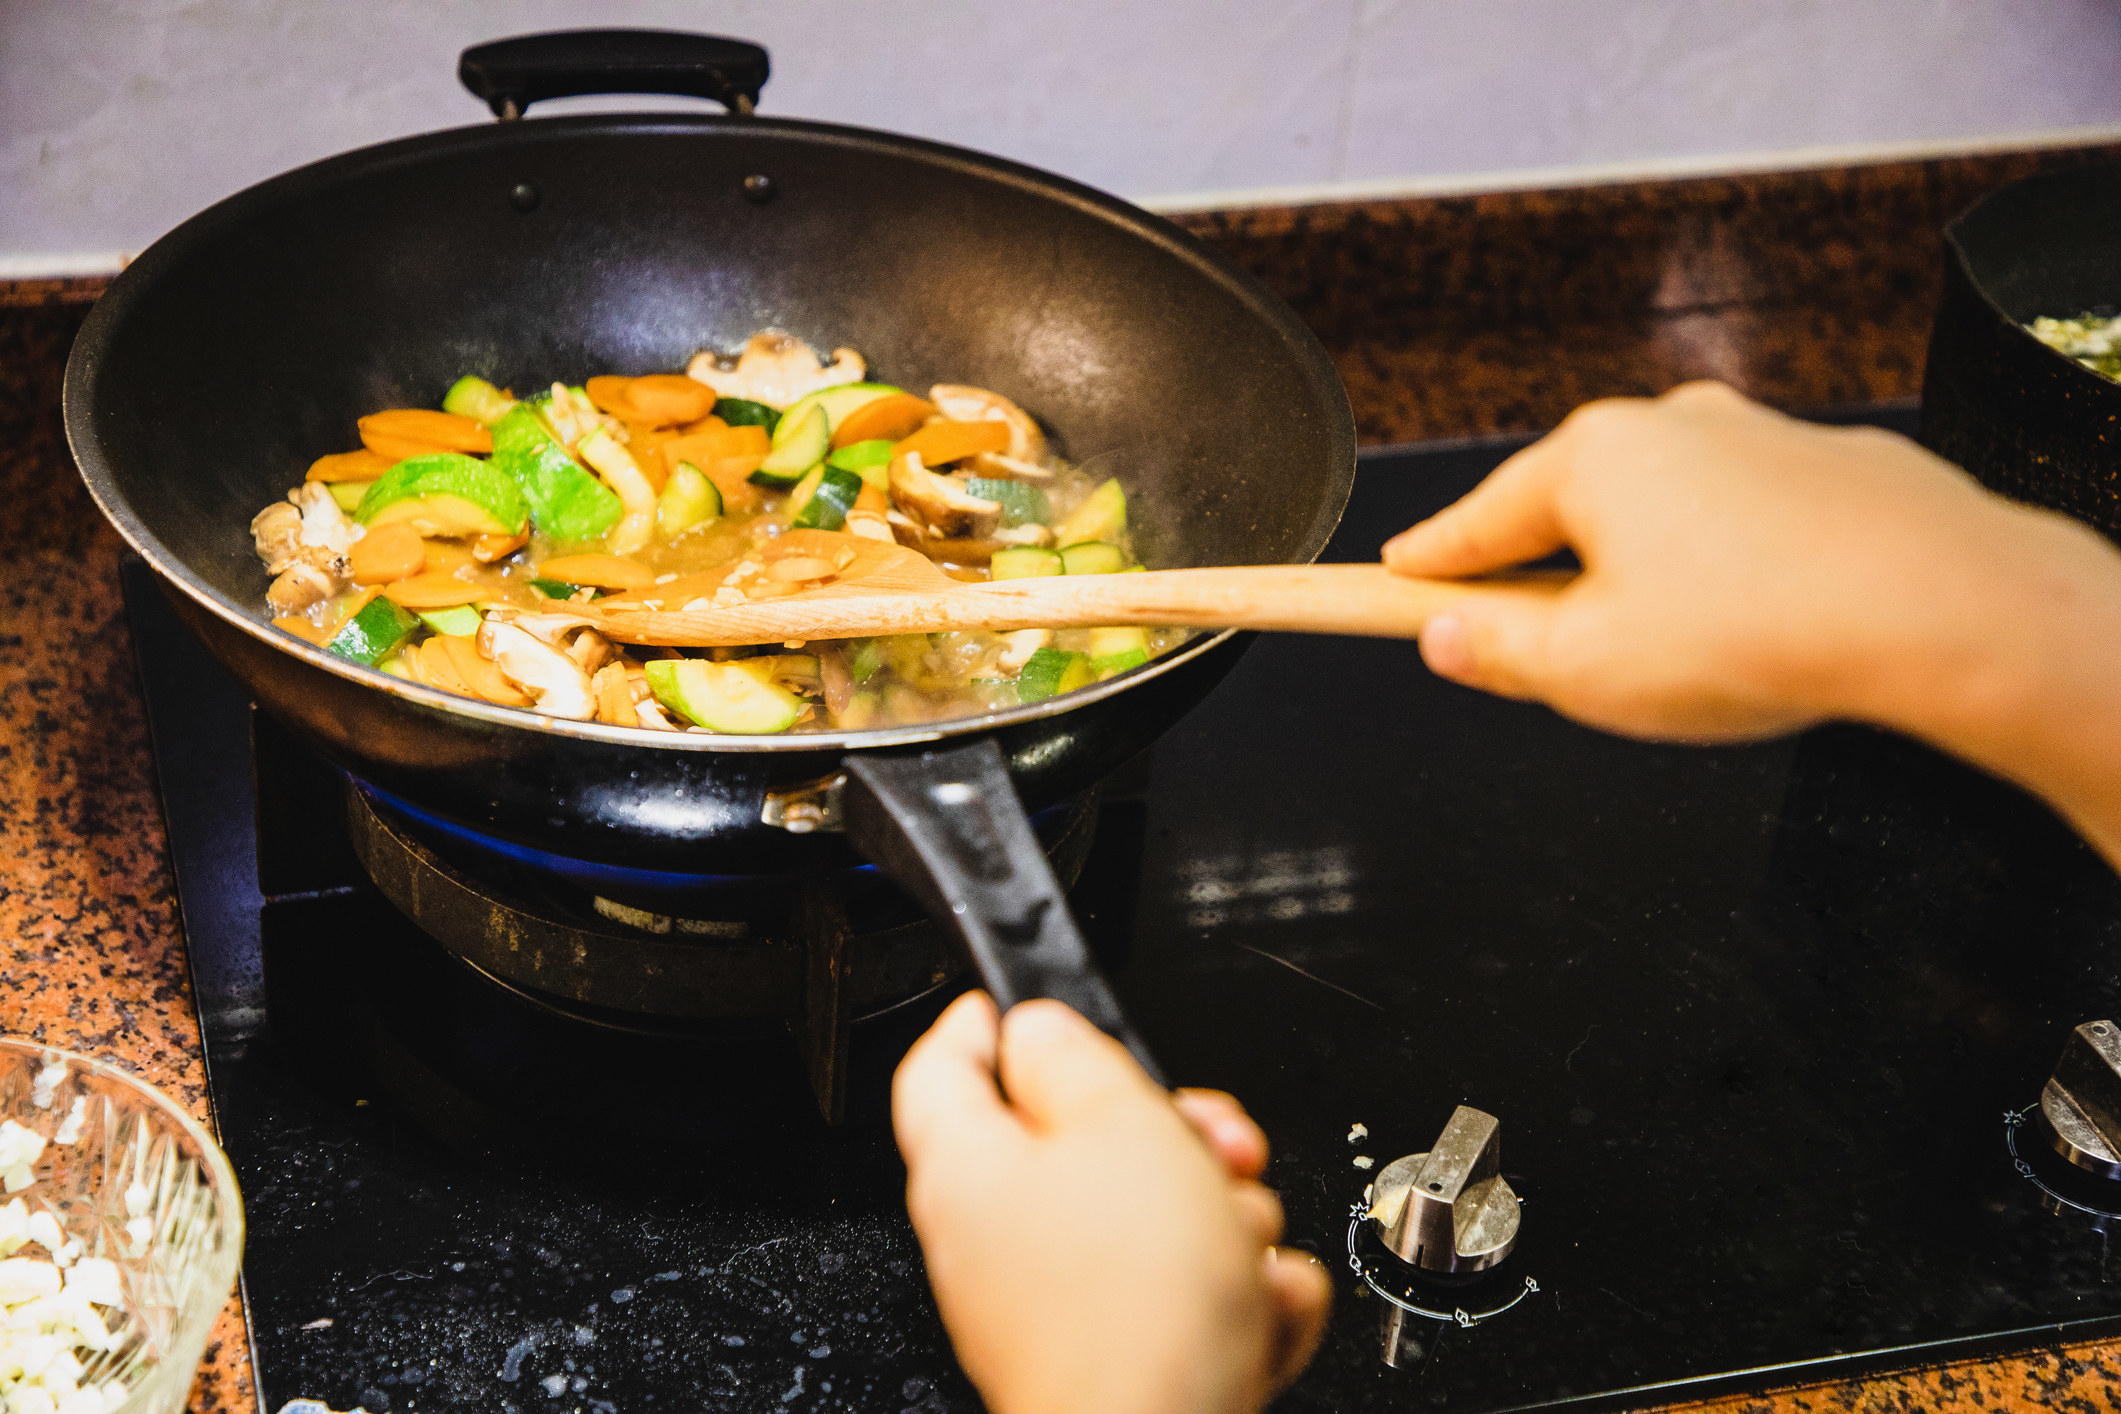 A person stir-frying vegetables.